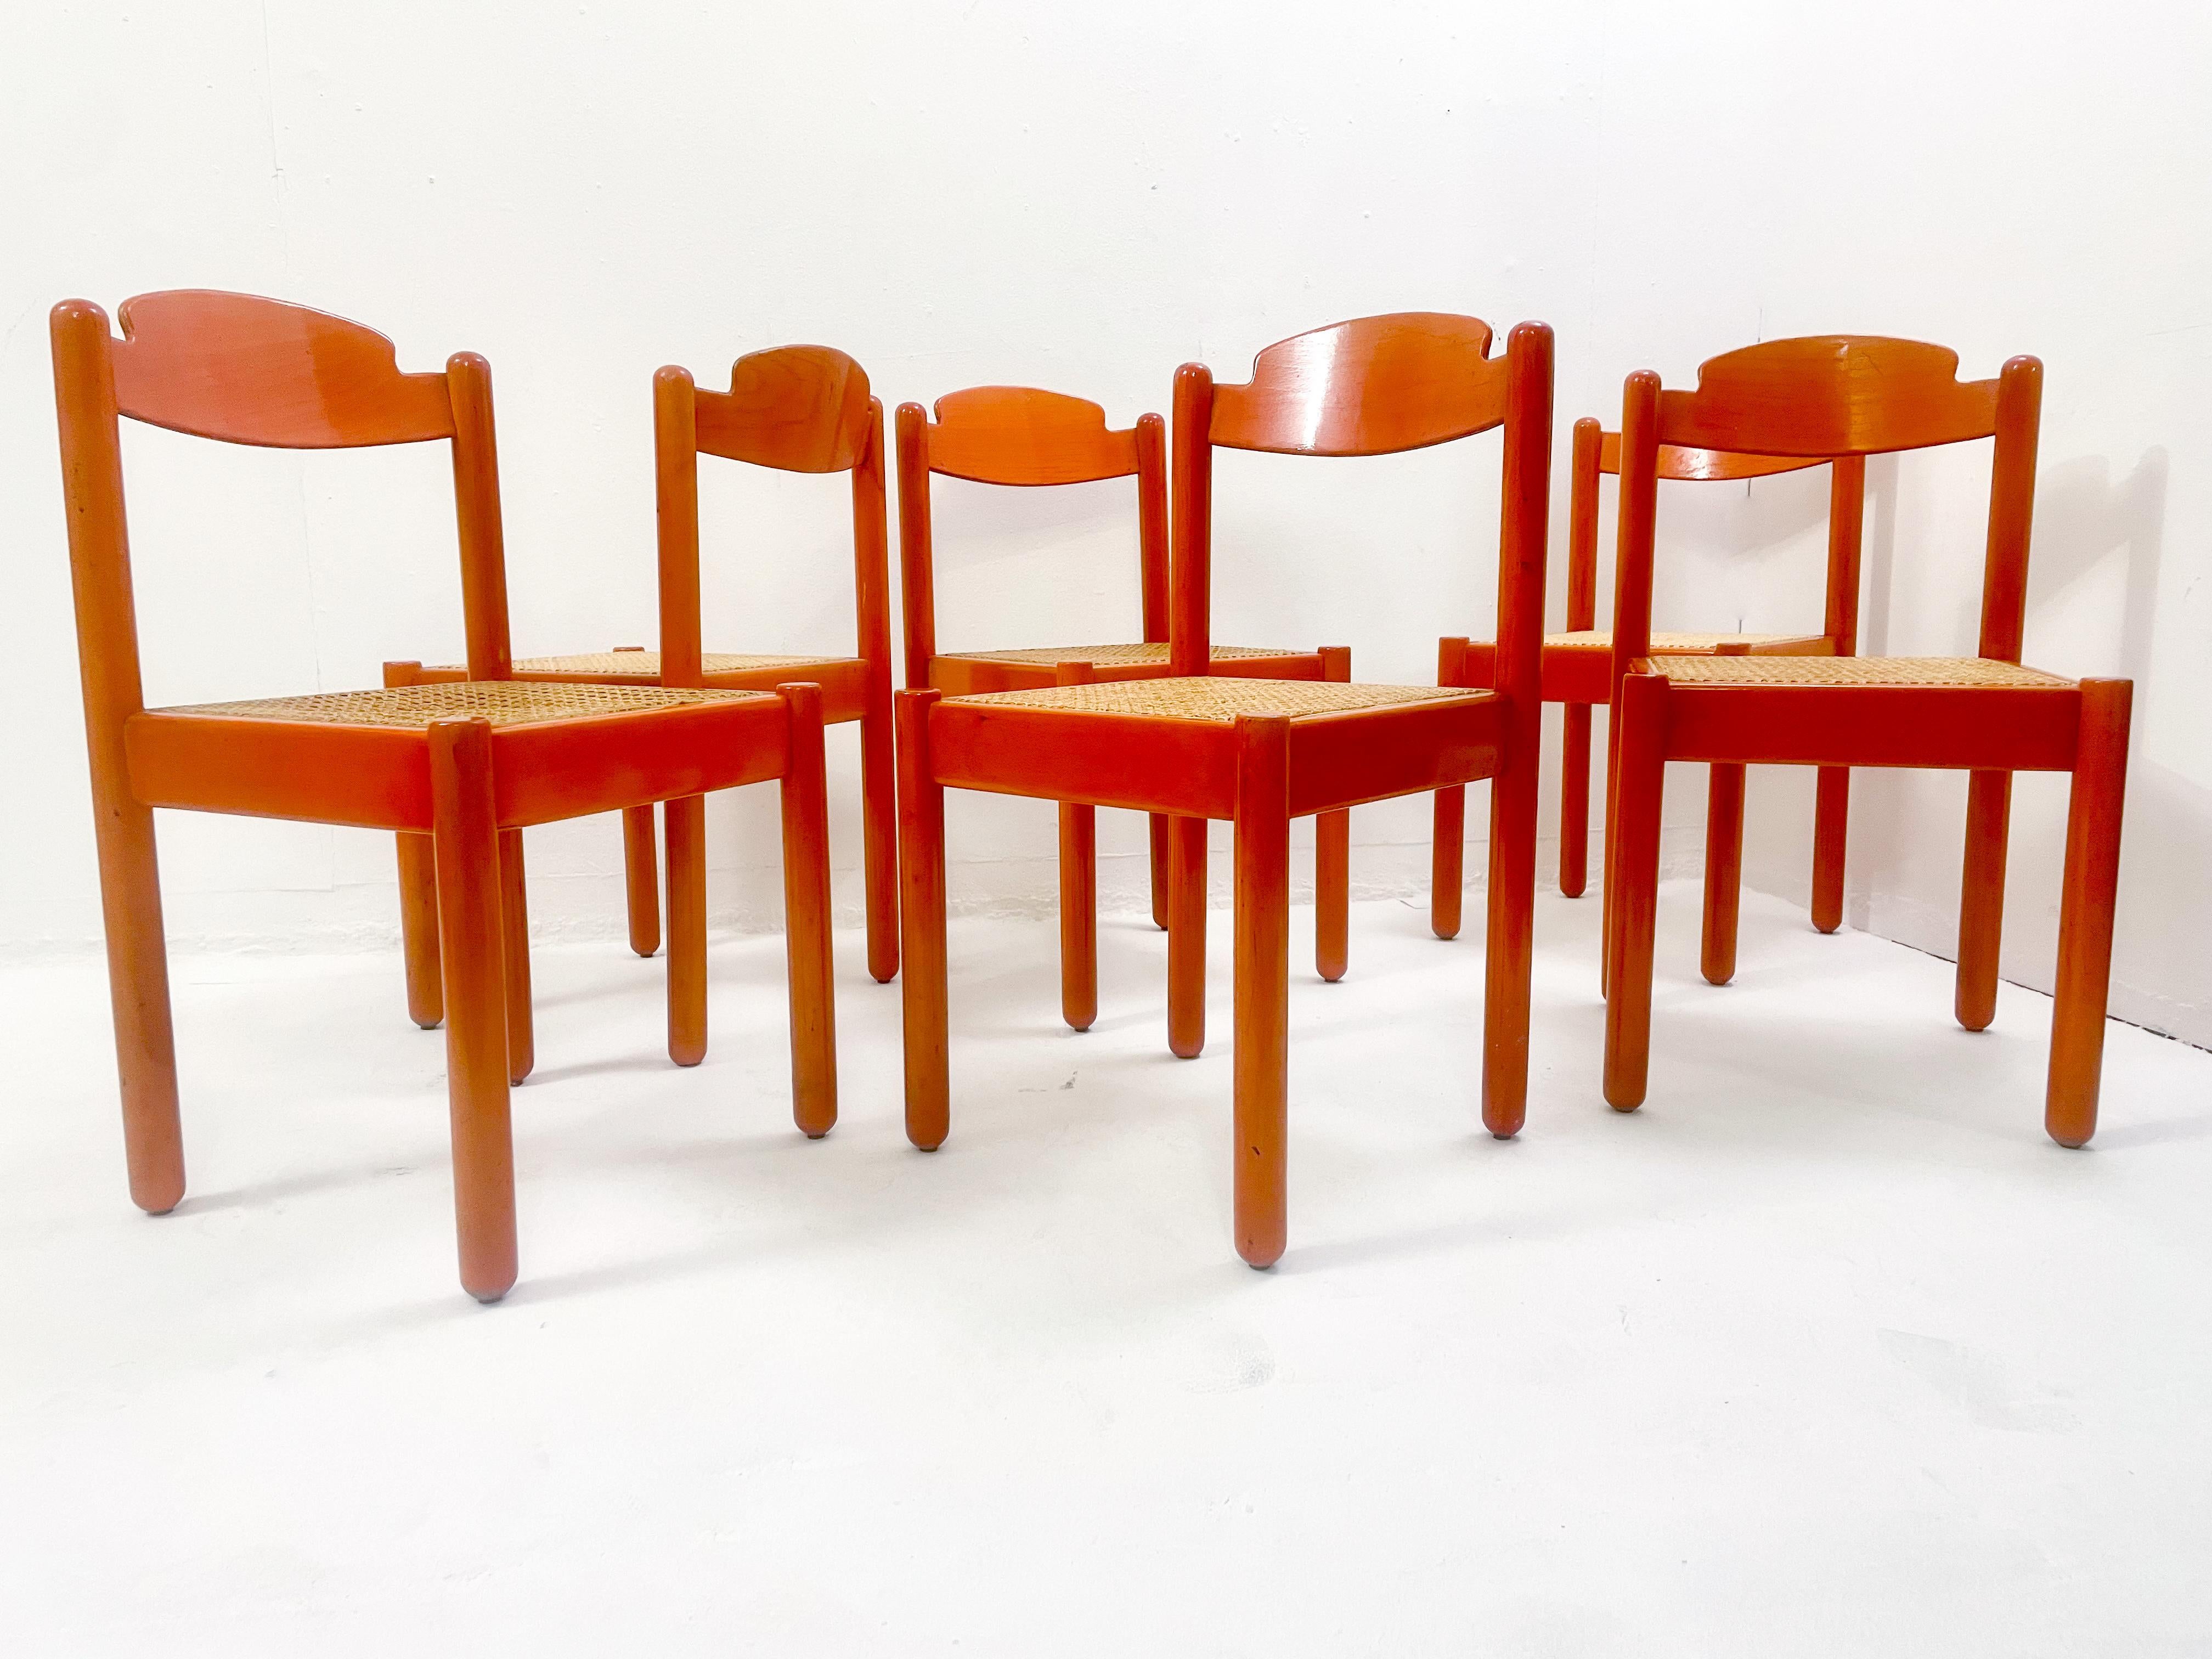 Mid-Century Modern Set of 6 Orange Chairs, Wood, Italy, 1960s For Sale 1